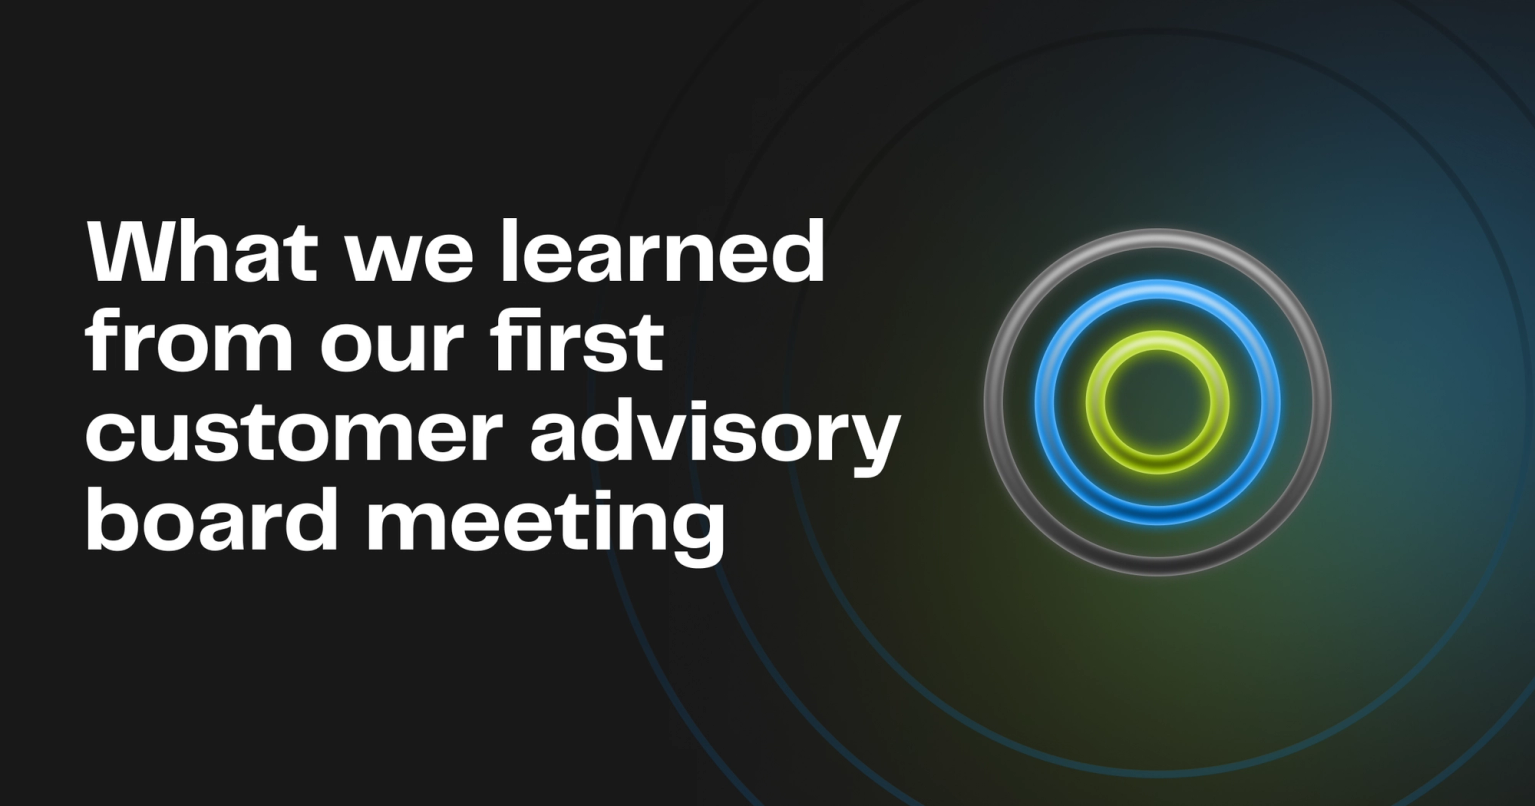 What we learned from our first customer advisory board meeting